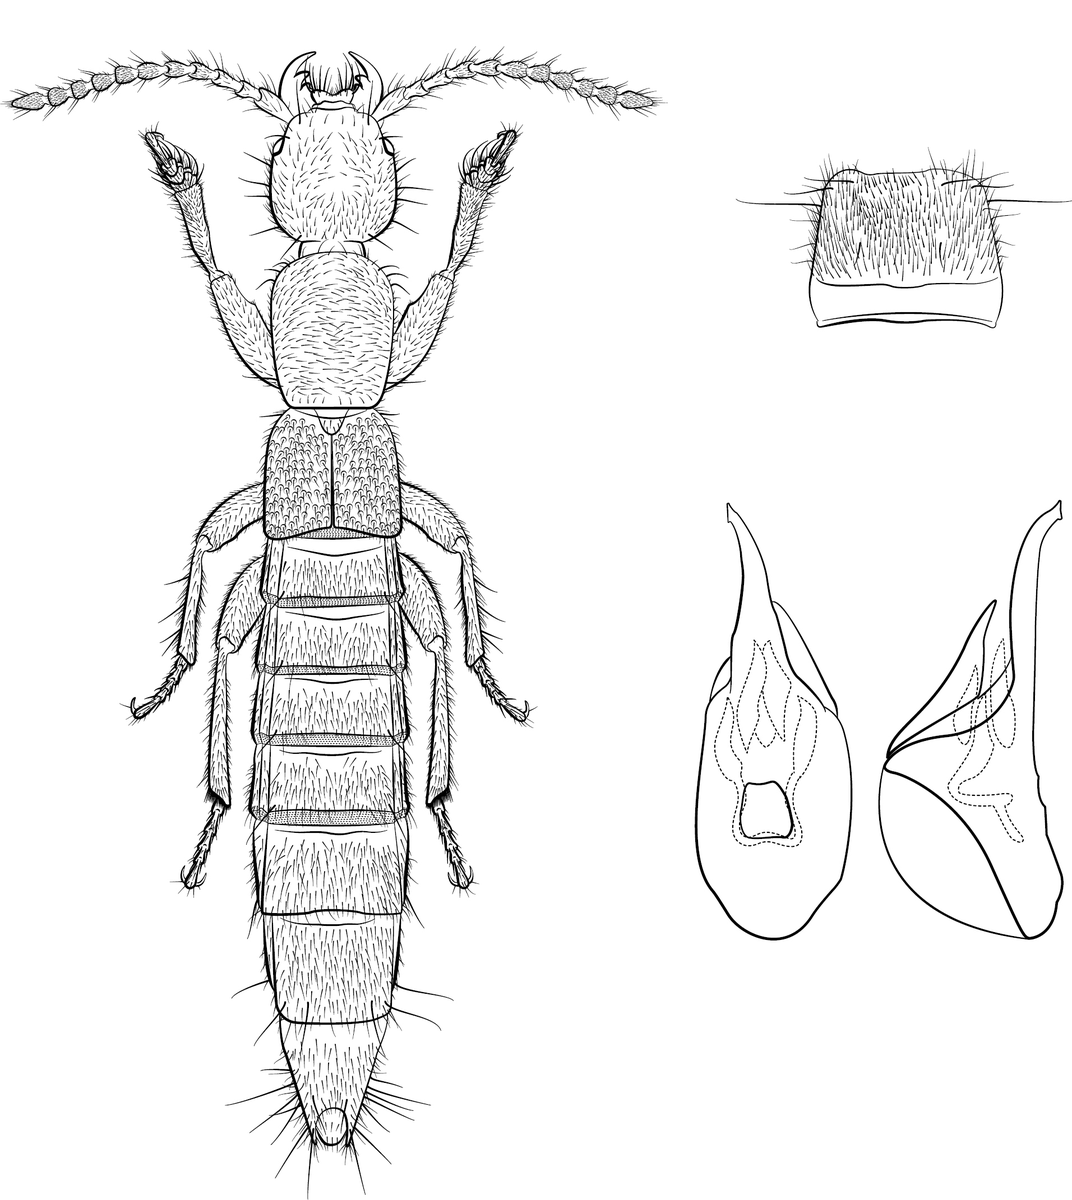 Ten new species are described in a review of Nearctic representatives of the rove beetle genus Lathrobium, by @ClemsonUniv researchers. Find out more here: doi.org/10.3897/zookey… #phylogeny #newspecies #Coleoptera